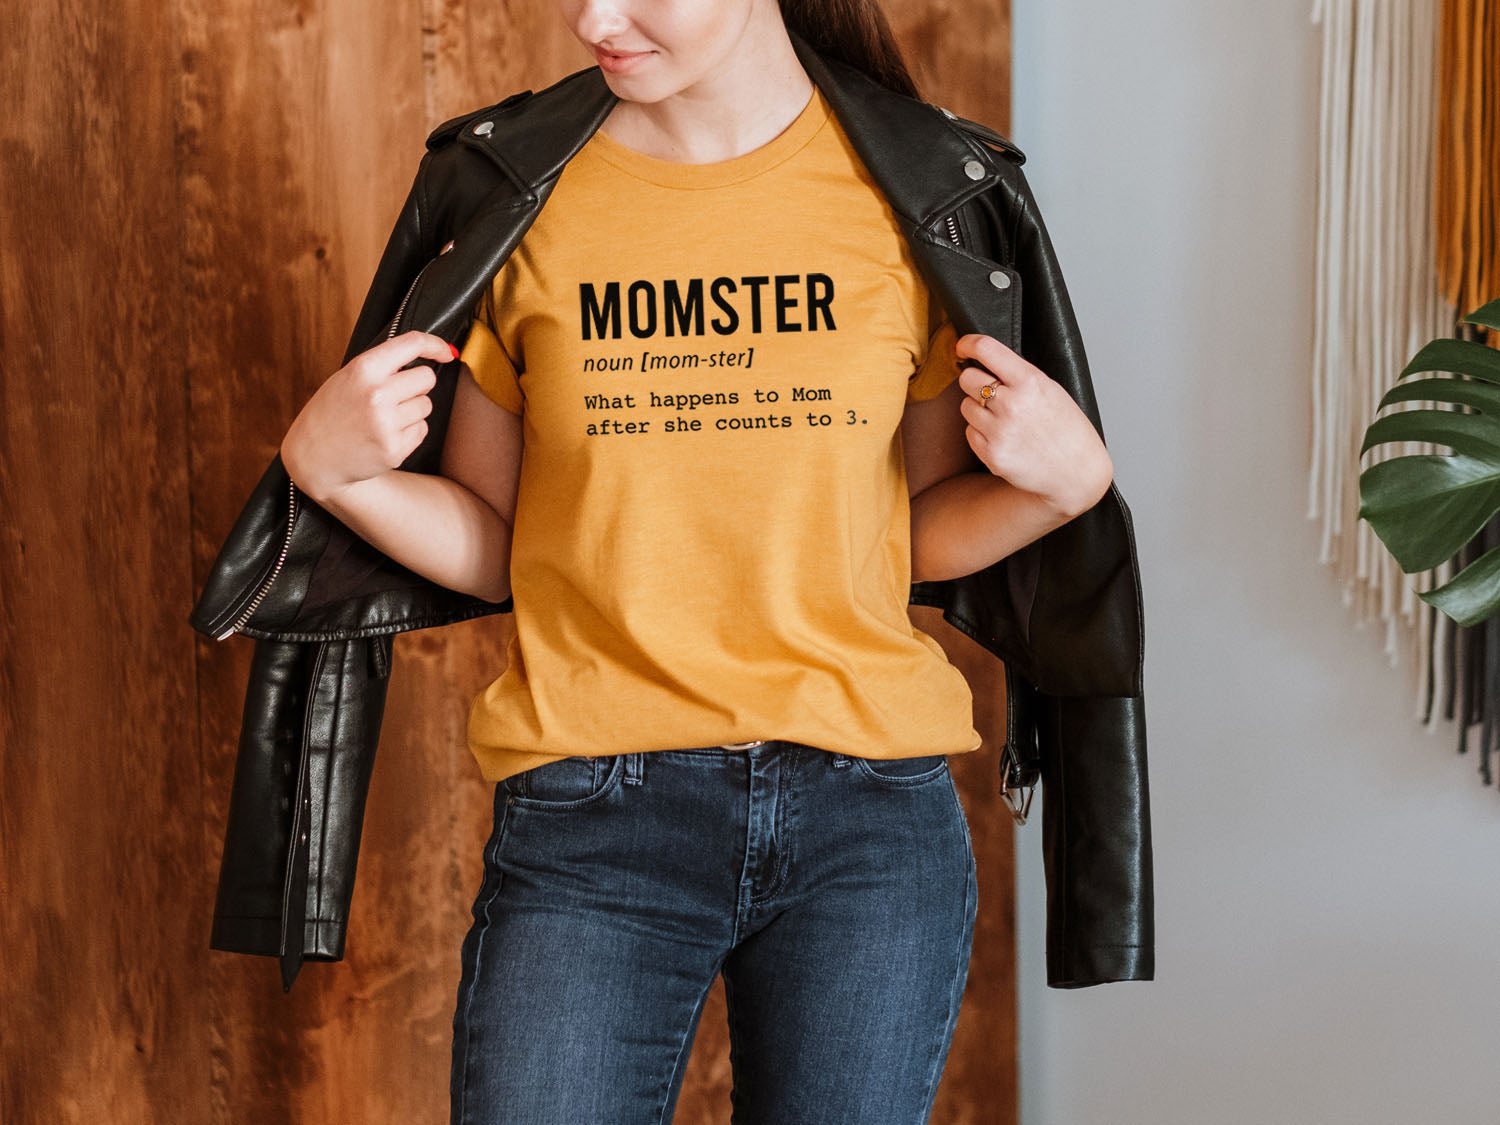 Funny Definition of Momster T-shirt - Funny Family Retro Vintage Design Printed Tee Shirt